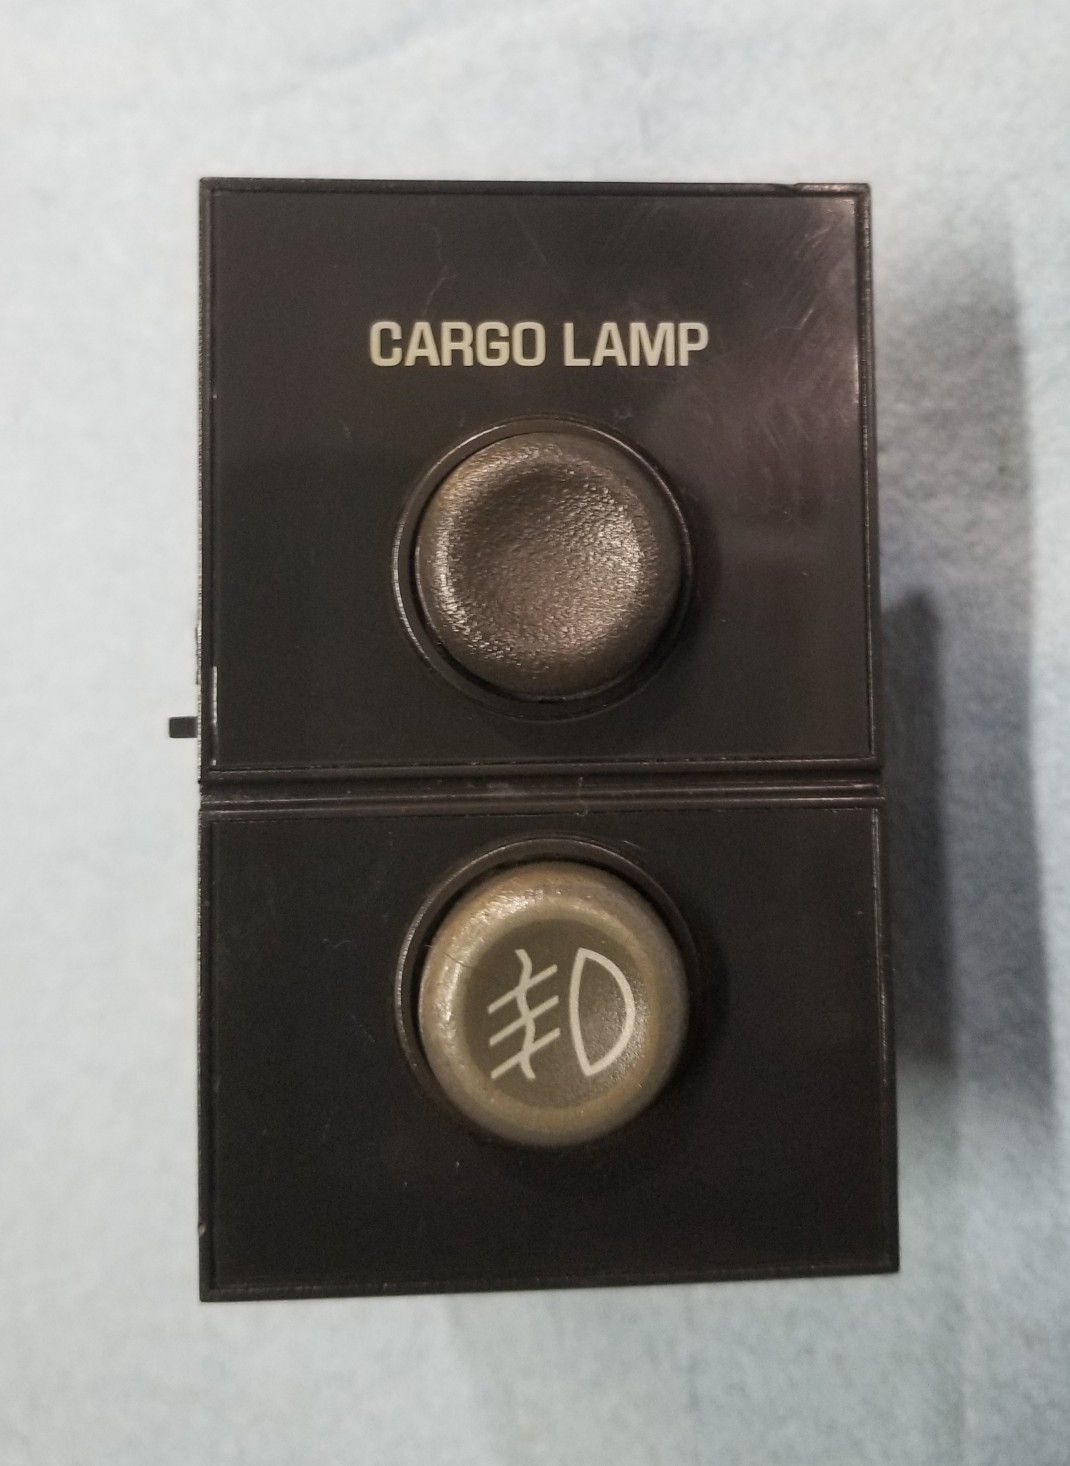 GM OEM Cargo Light And Fog Light Switch in Great Condition.